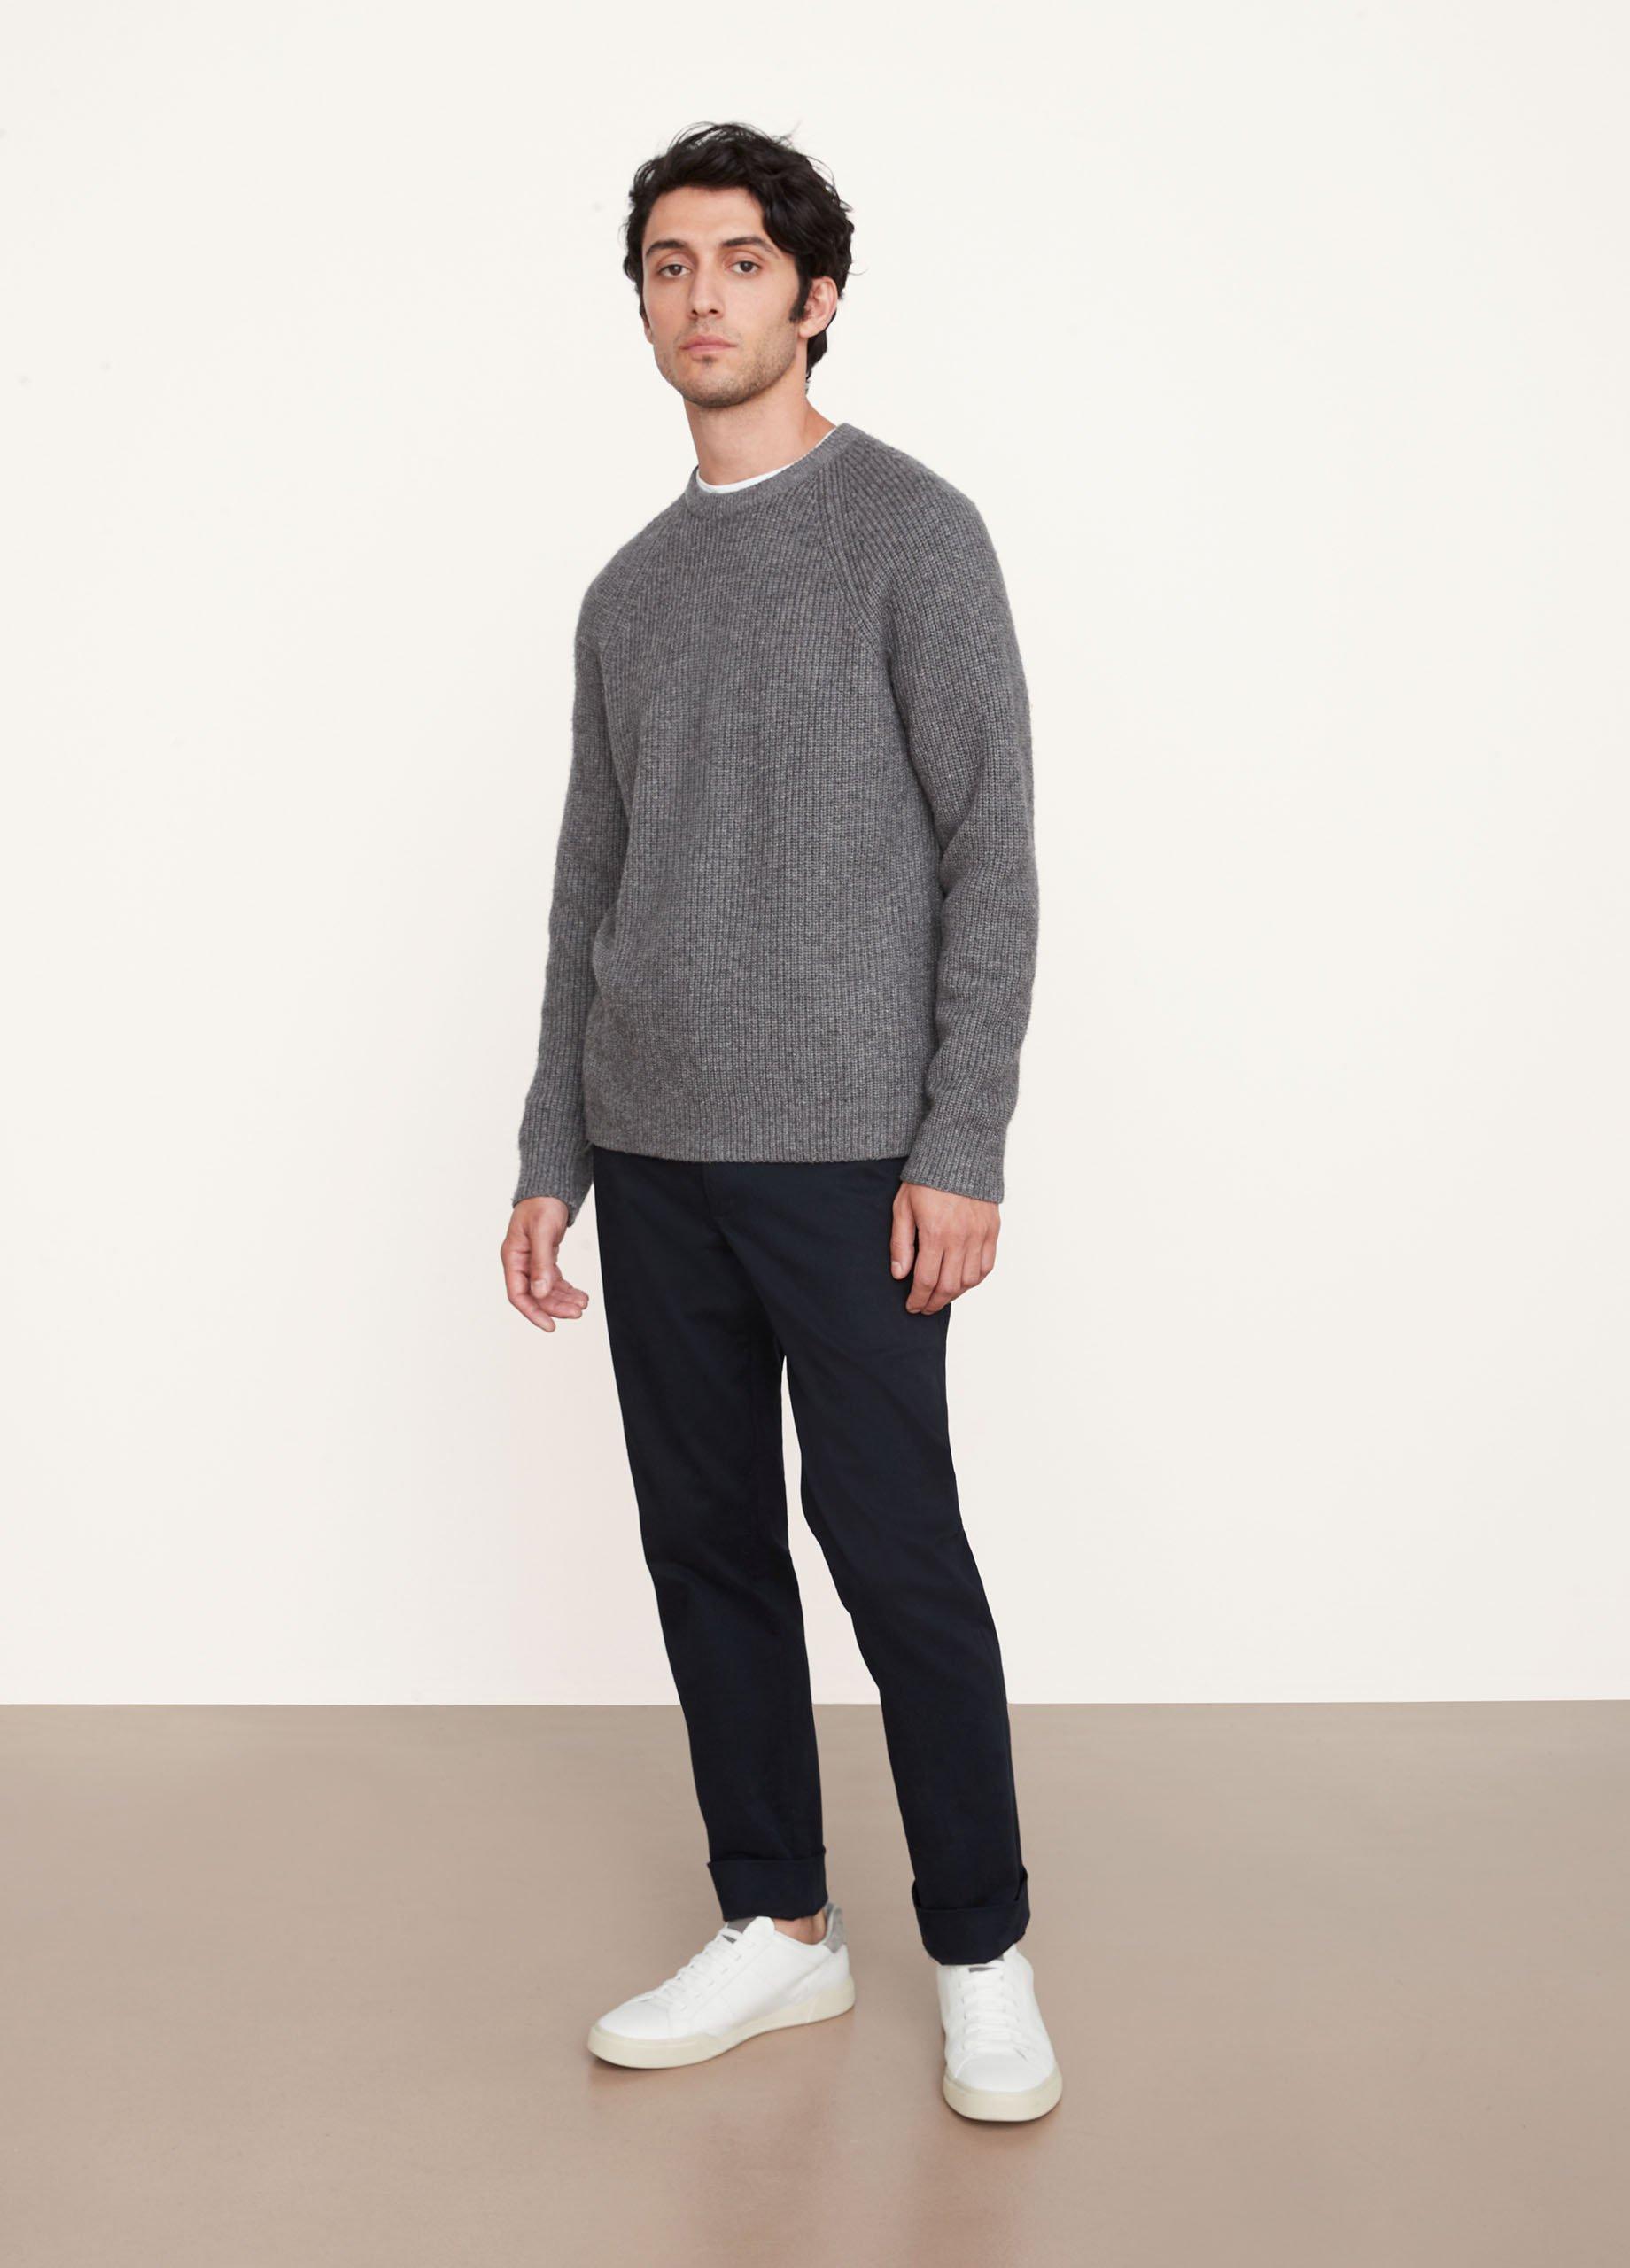 Raglan Ribbed Crew in Vince Products | Vince